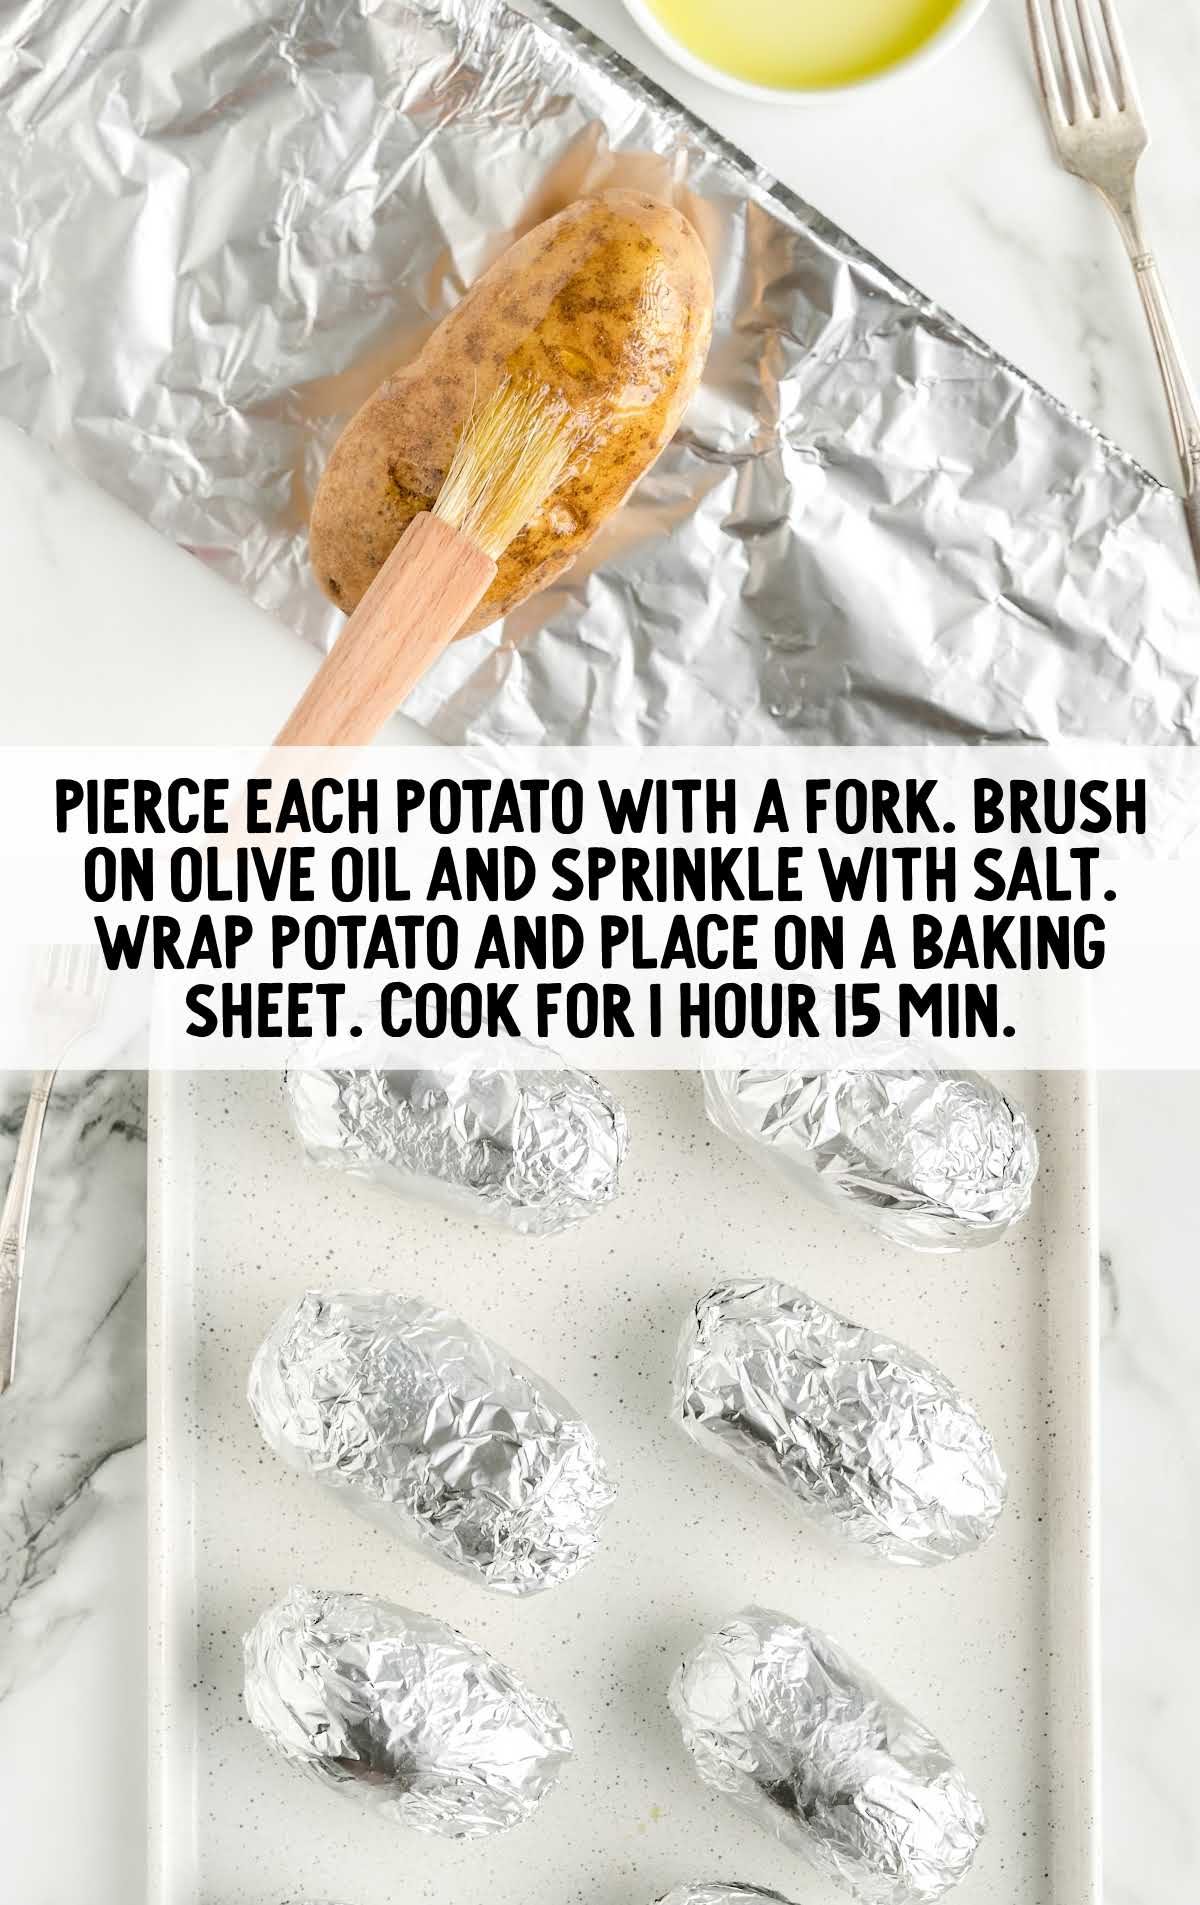 potatoes brushed with olive oil and sprinkled with salt then wrapped in aluminum foil on a baking sheet